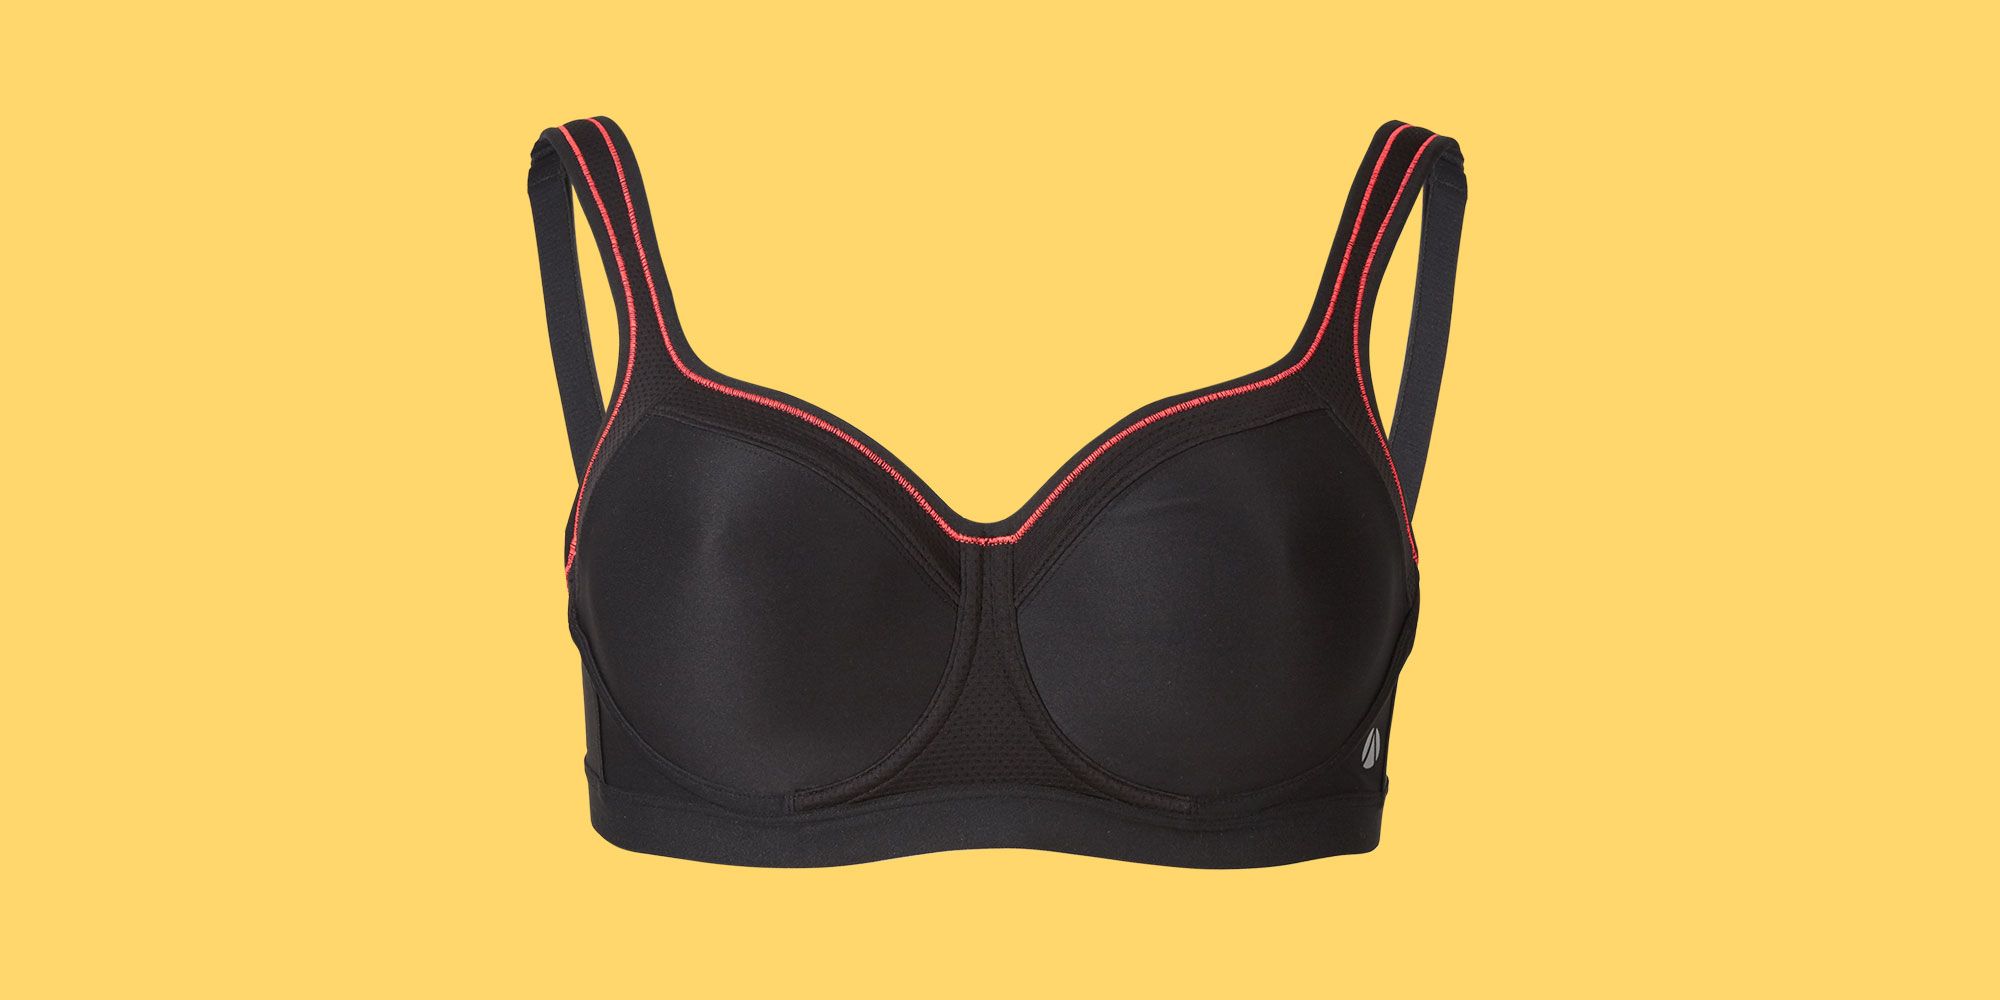 Details about   MARKS & SPENCER M&S MEDIUM IMPACT SANTONI NON-WIRED BLACK/GREY SPORTS BRA SMALL 